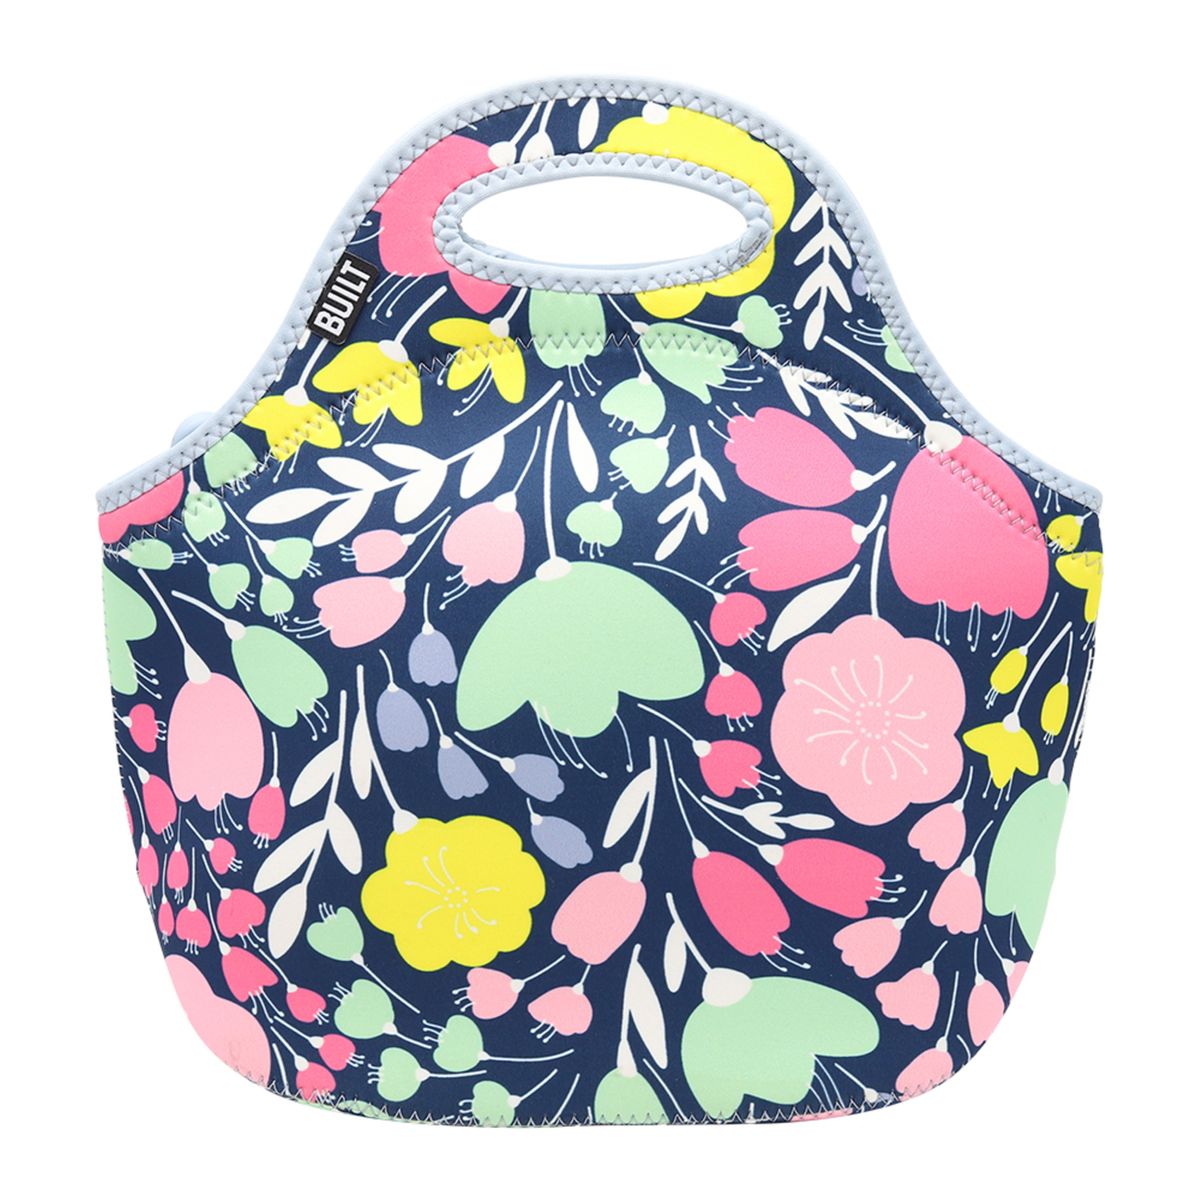 [RDY] [送料無料] BUILT グルメ・トゥ・ゴー ネオプレンランチバッグ ファンフローラル Gourmet to Go Neoprene Lunch Bag, Fun Floral [楽天海外通販] | Built Gourmet to Go Neoprene Lunch Bag in Fun Floral